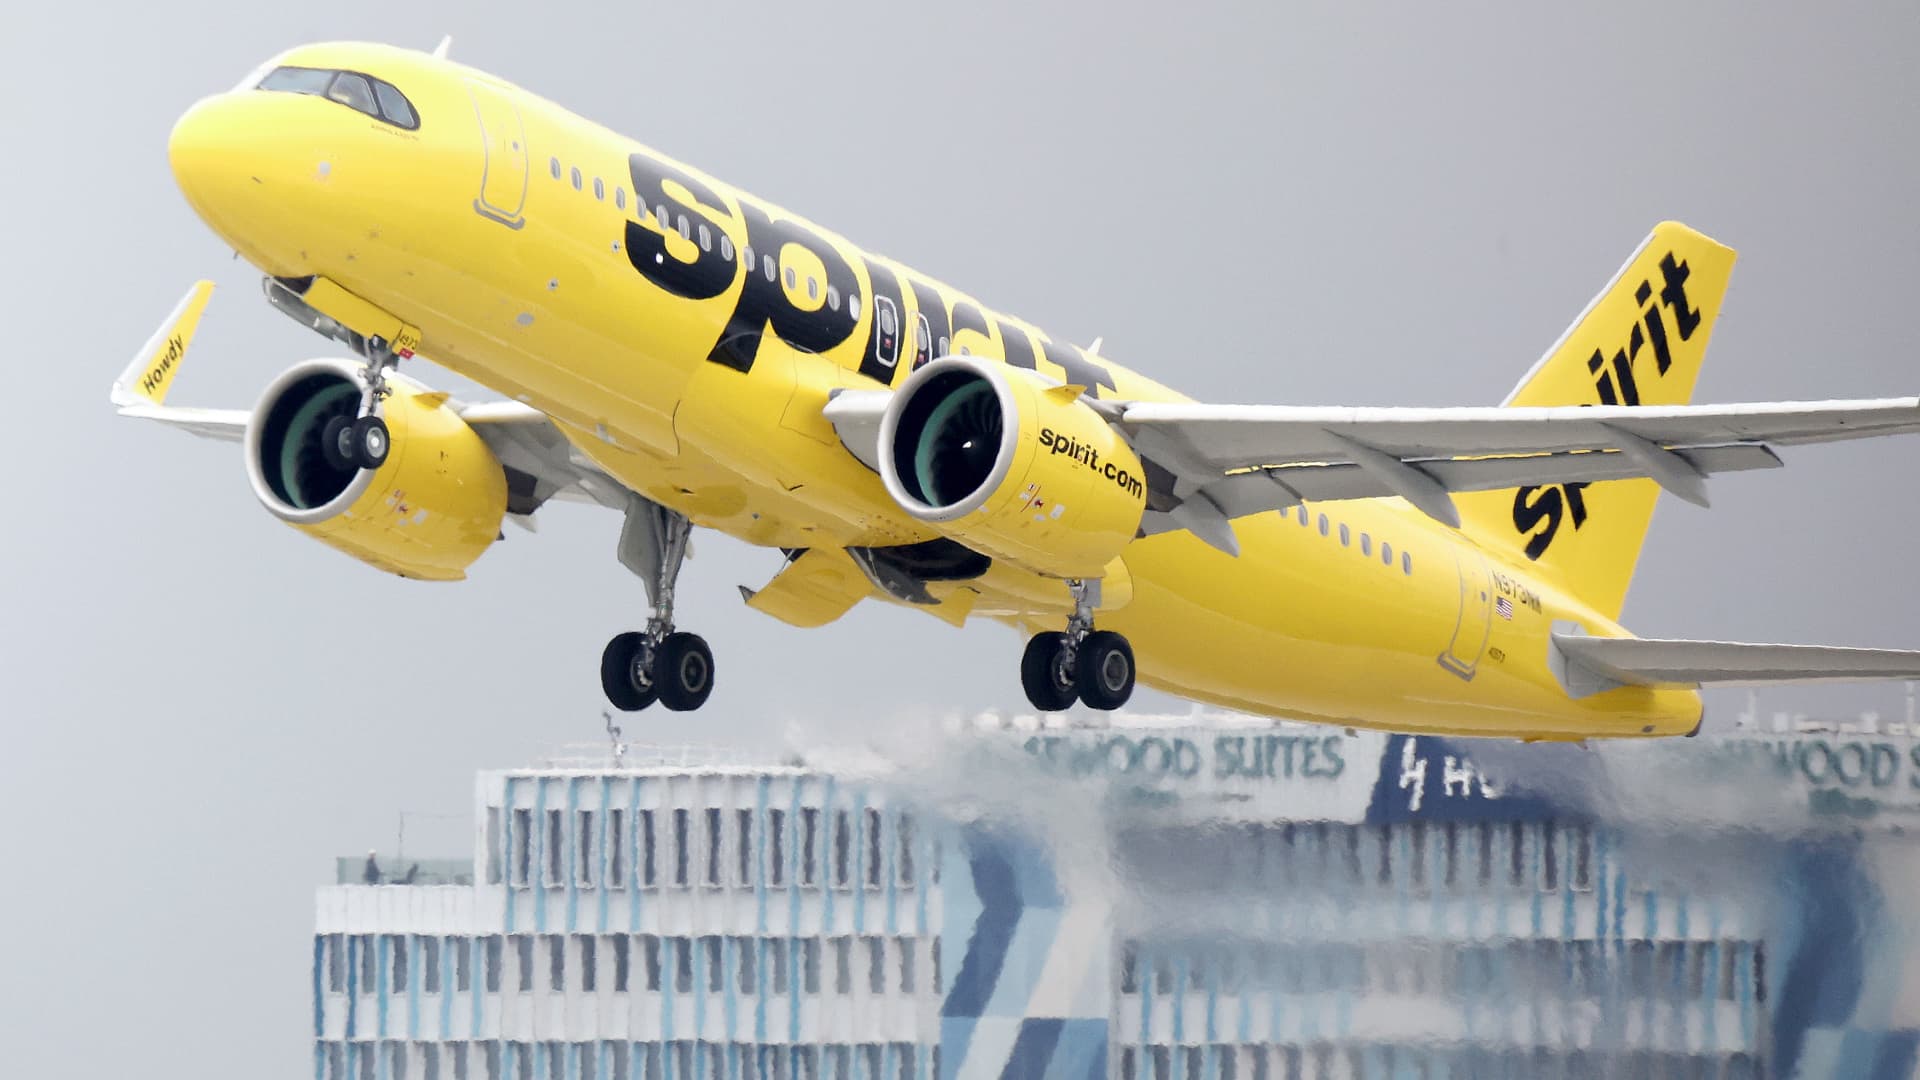 Spirit Airlines offers buyouts to salaried employees to cut costs